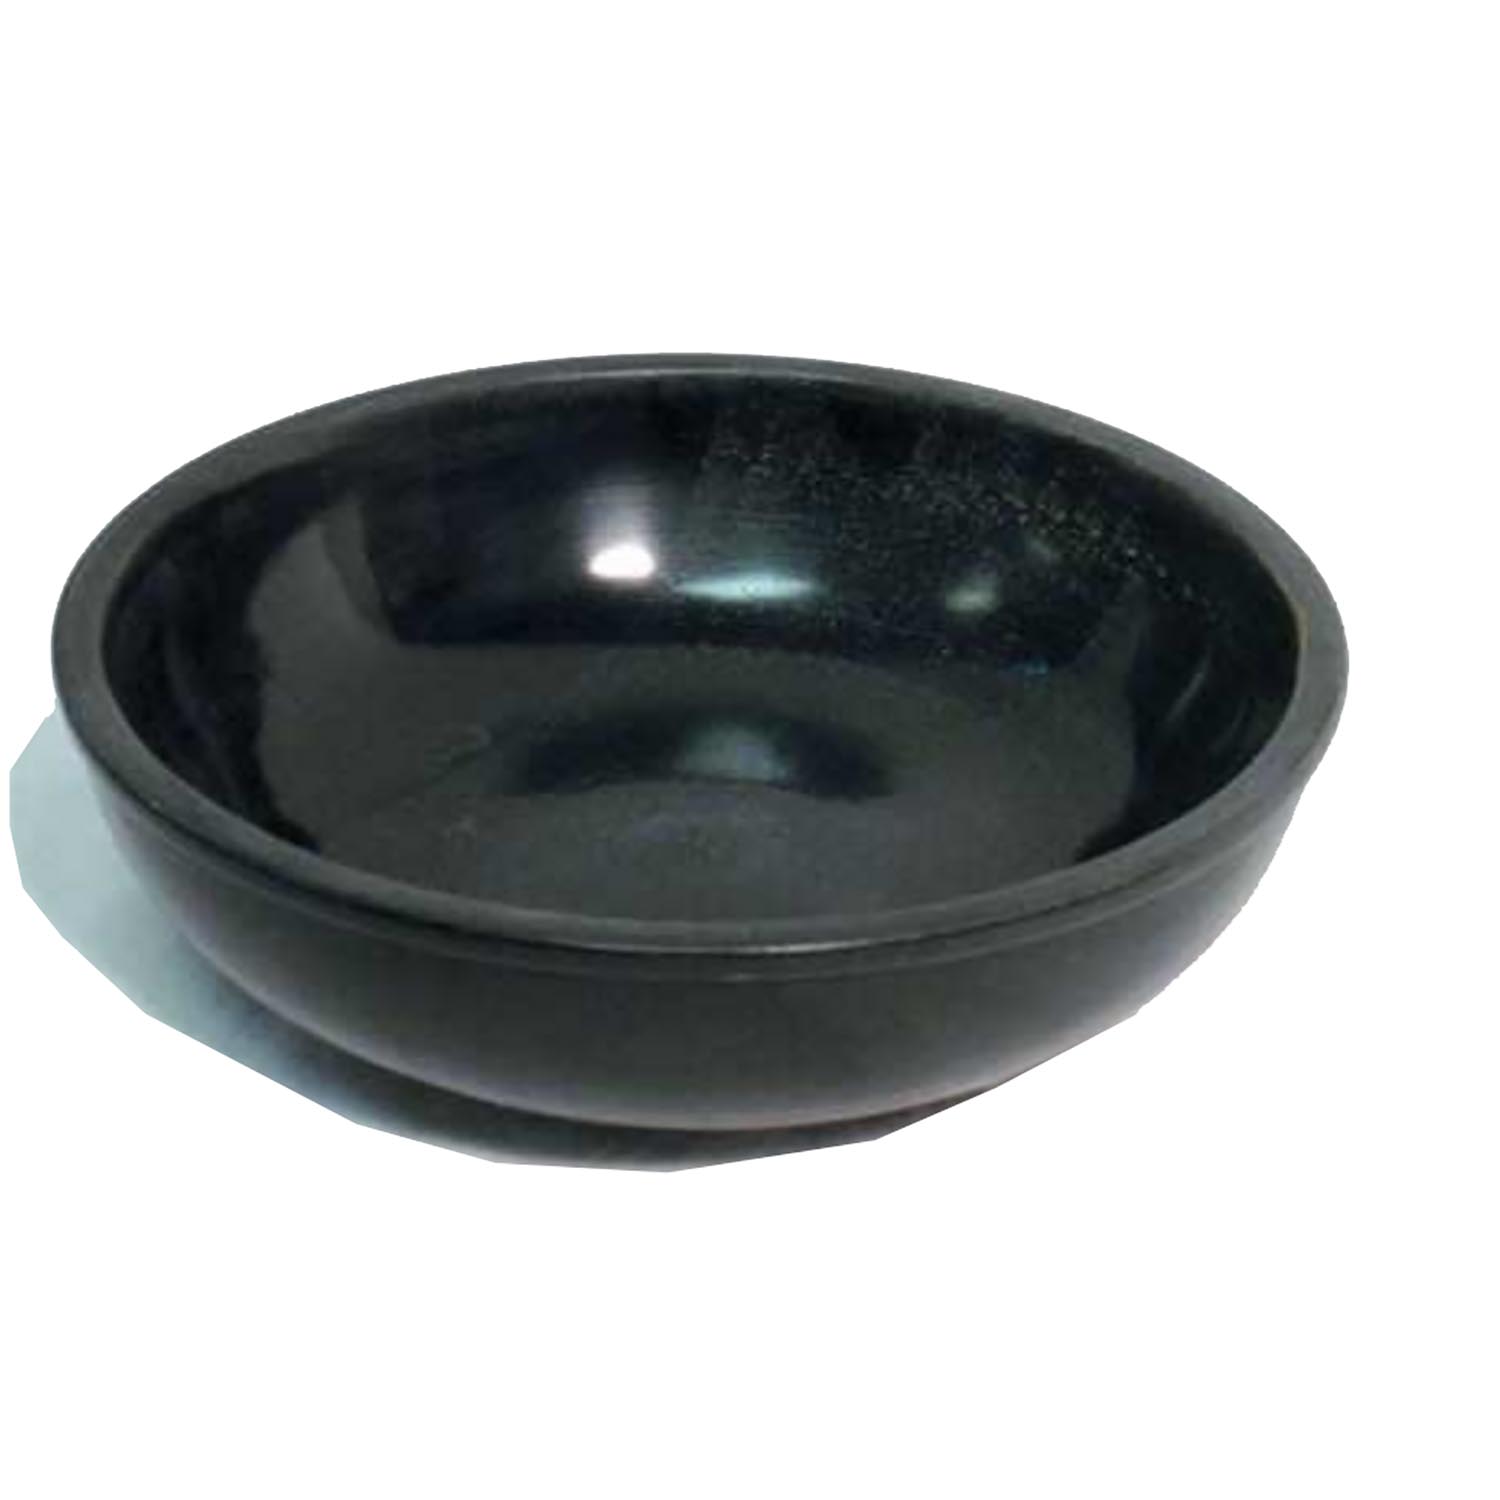 6. FUTURE DIVINATION SCRYING BOWL